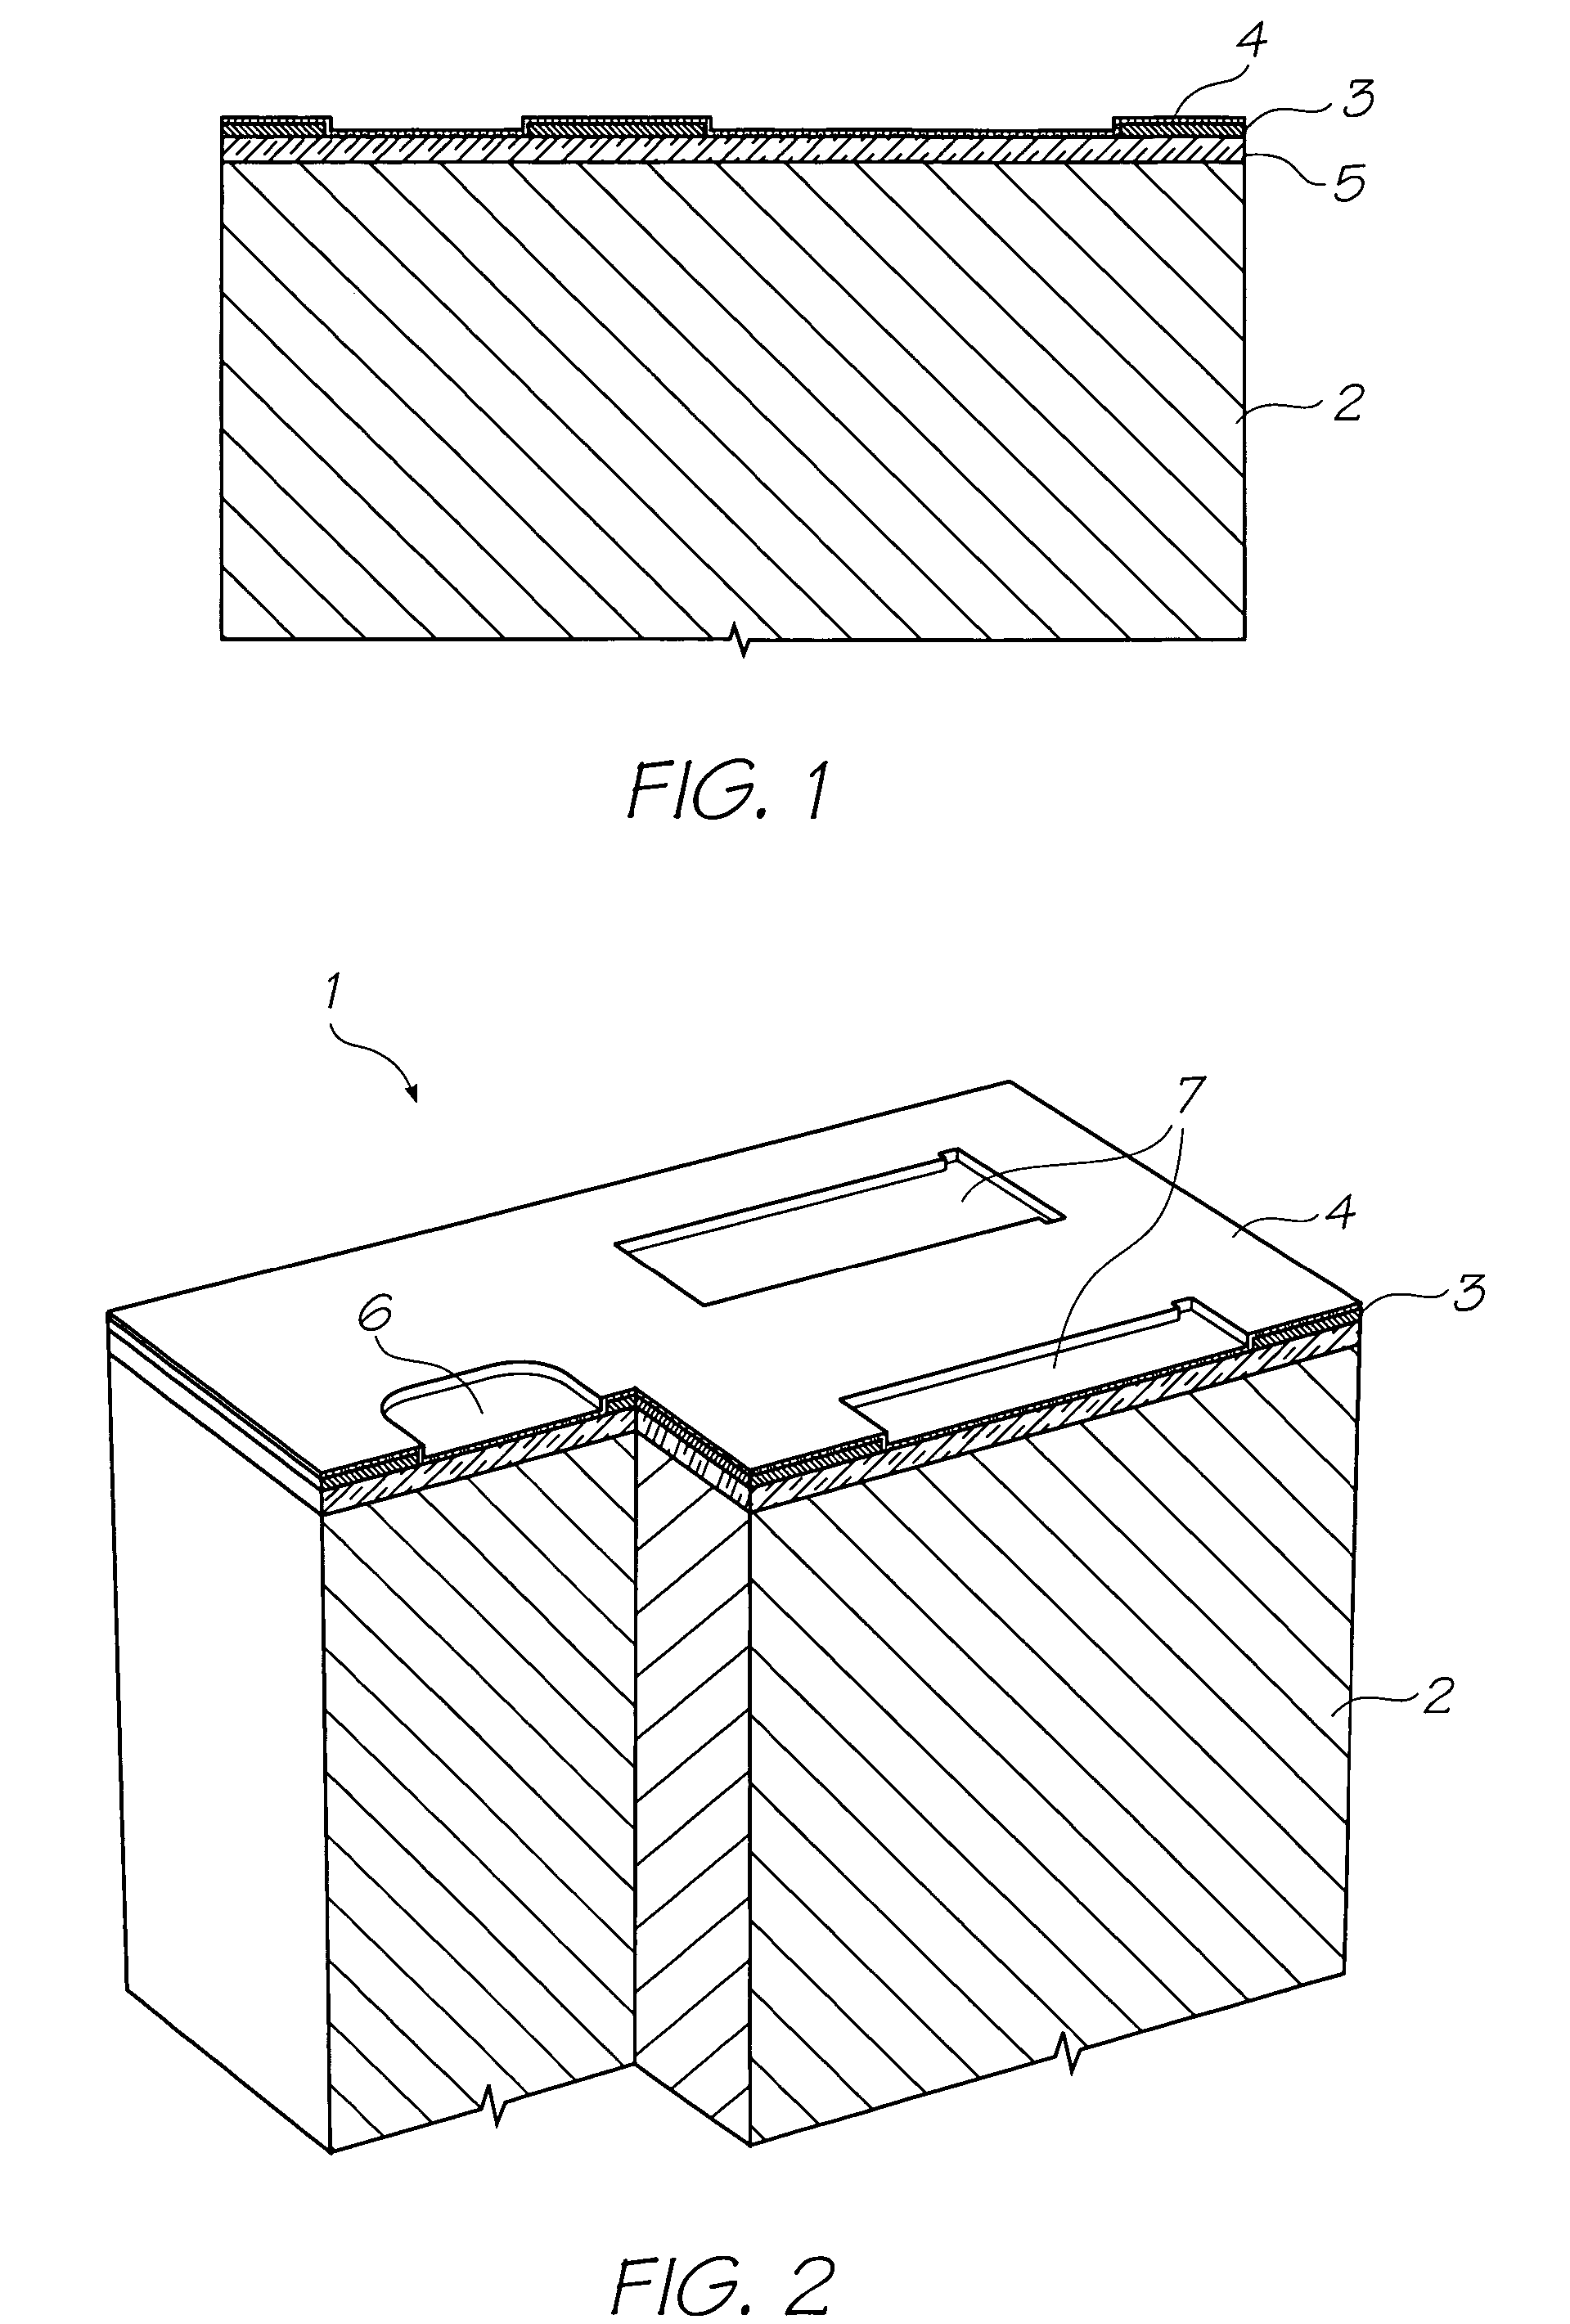 Method of forming low-stiction nozzle plate for an inkjet printhead